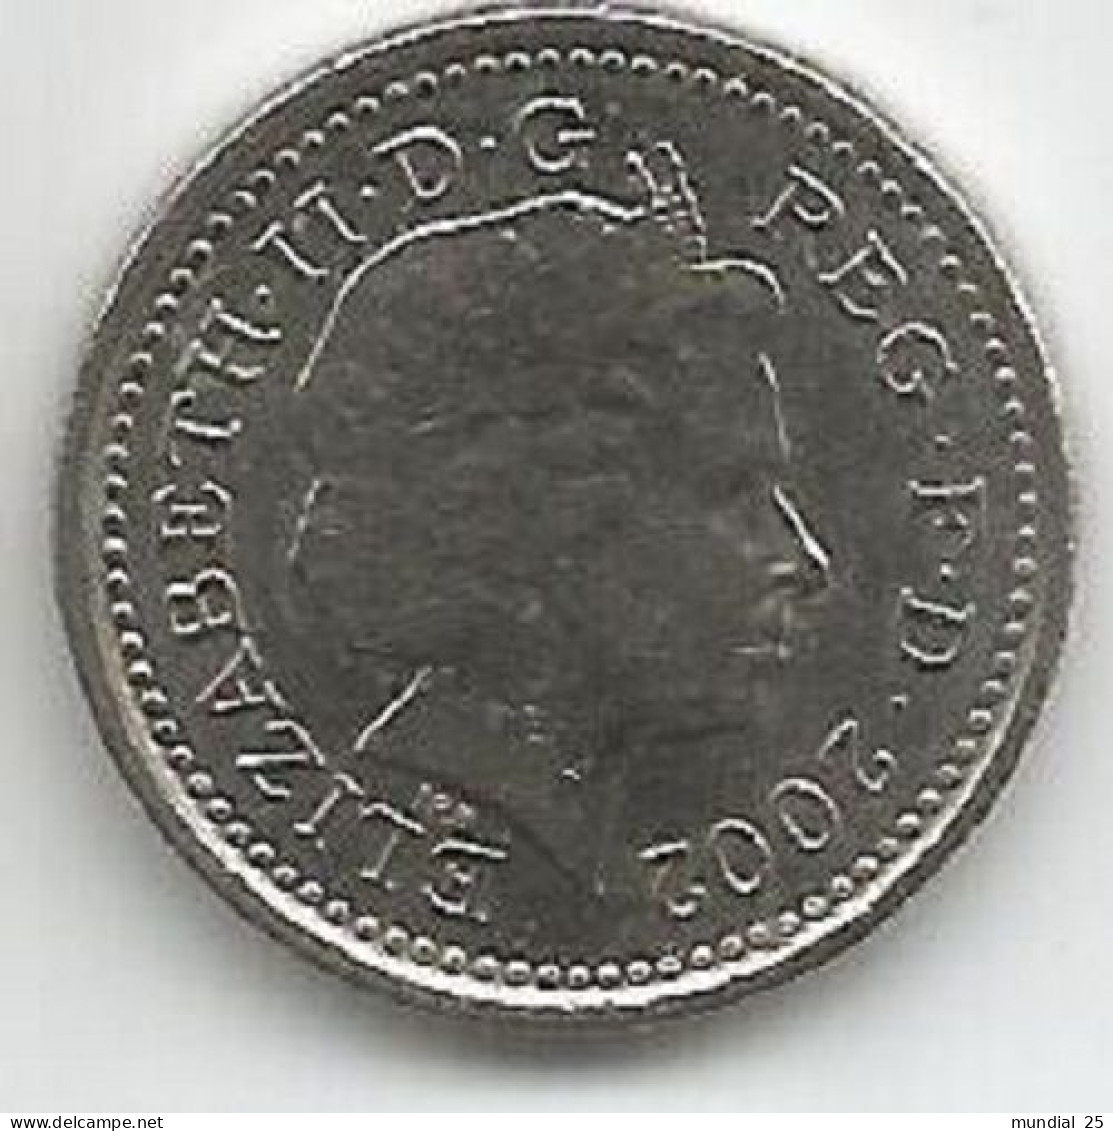 GREAT BRITAIN 5 PENCE 2002 - 5 Pence & 5 New Pence